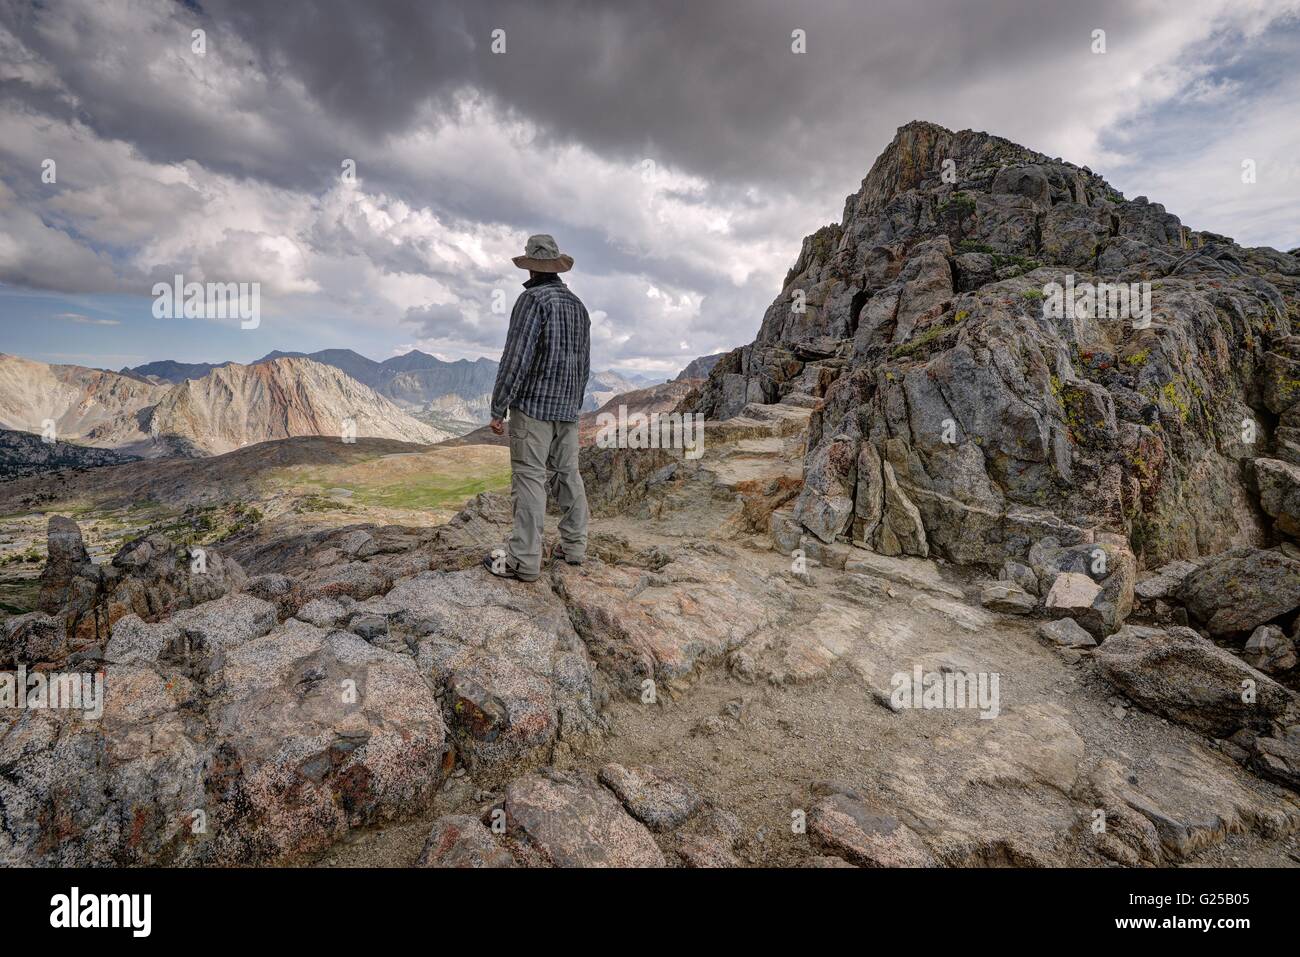 Rear view of man standing on mountain, Kings Canyon National Park, California, United States Stock Photo